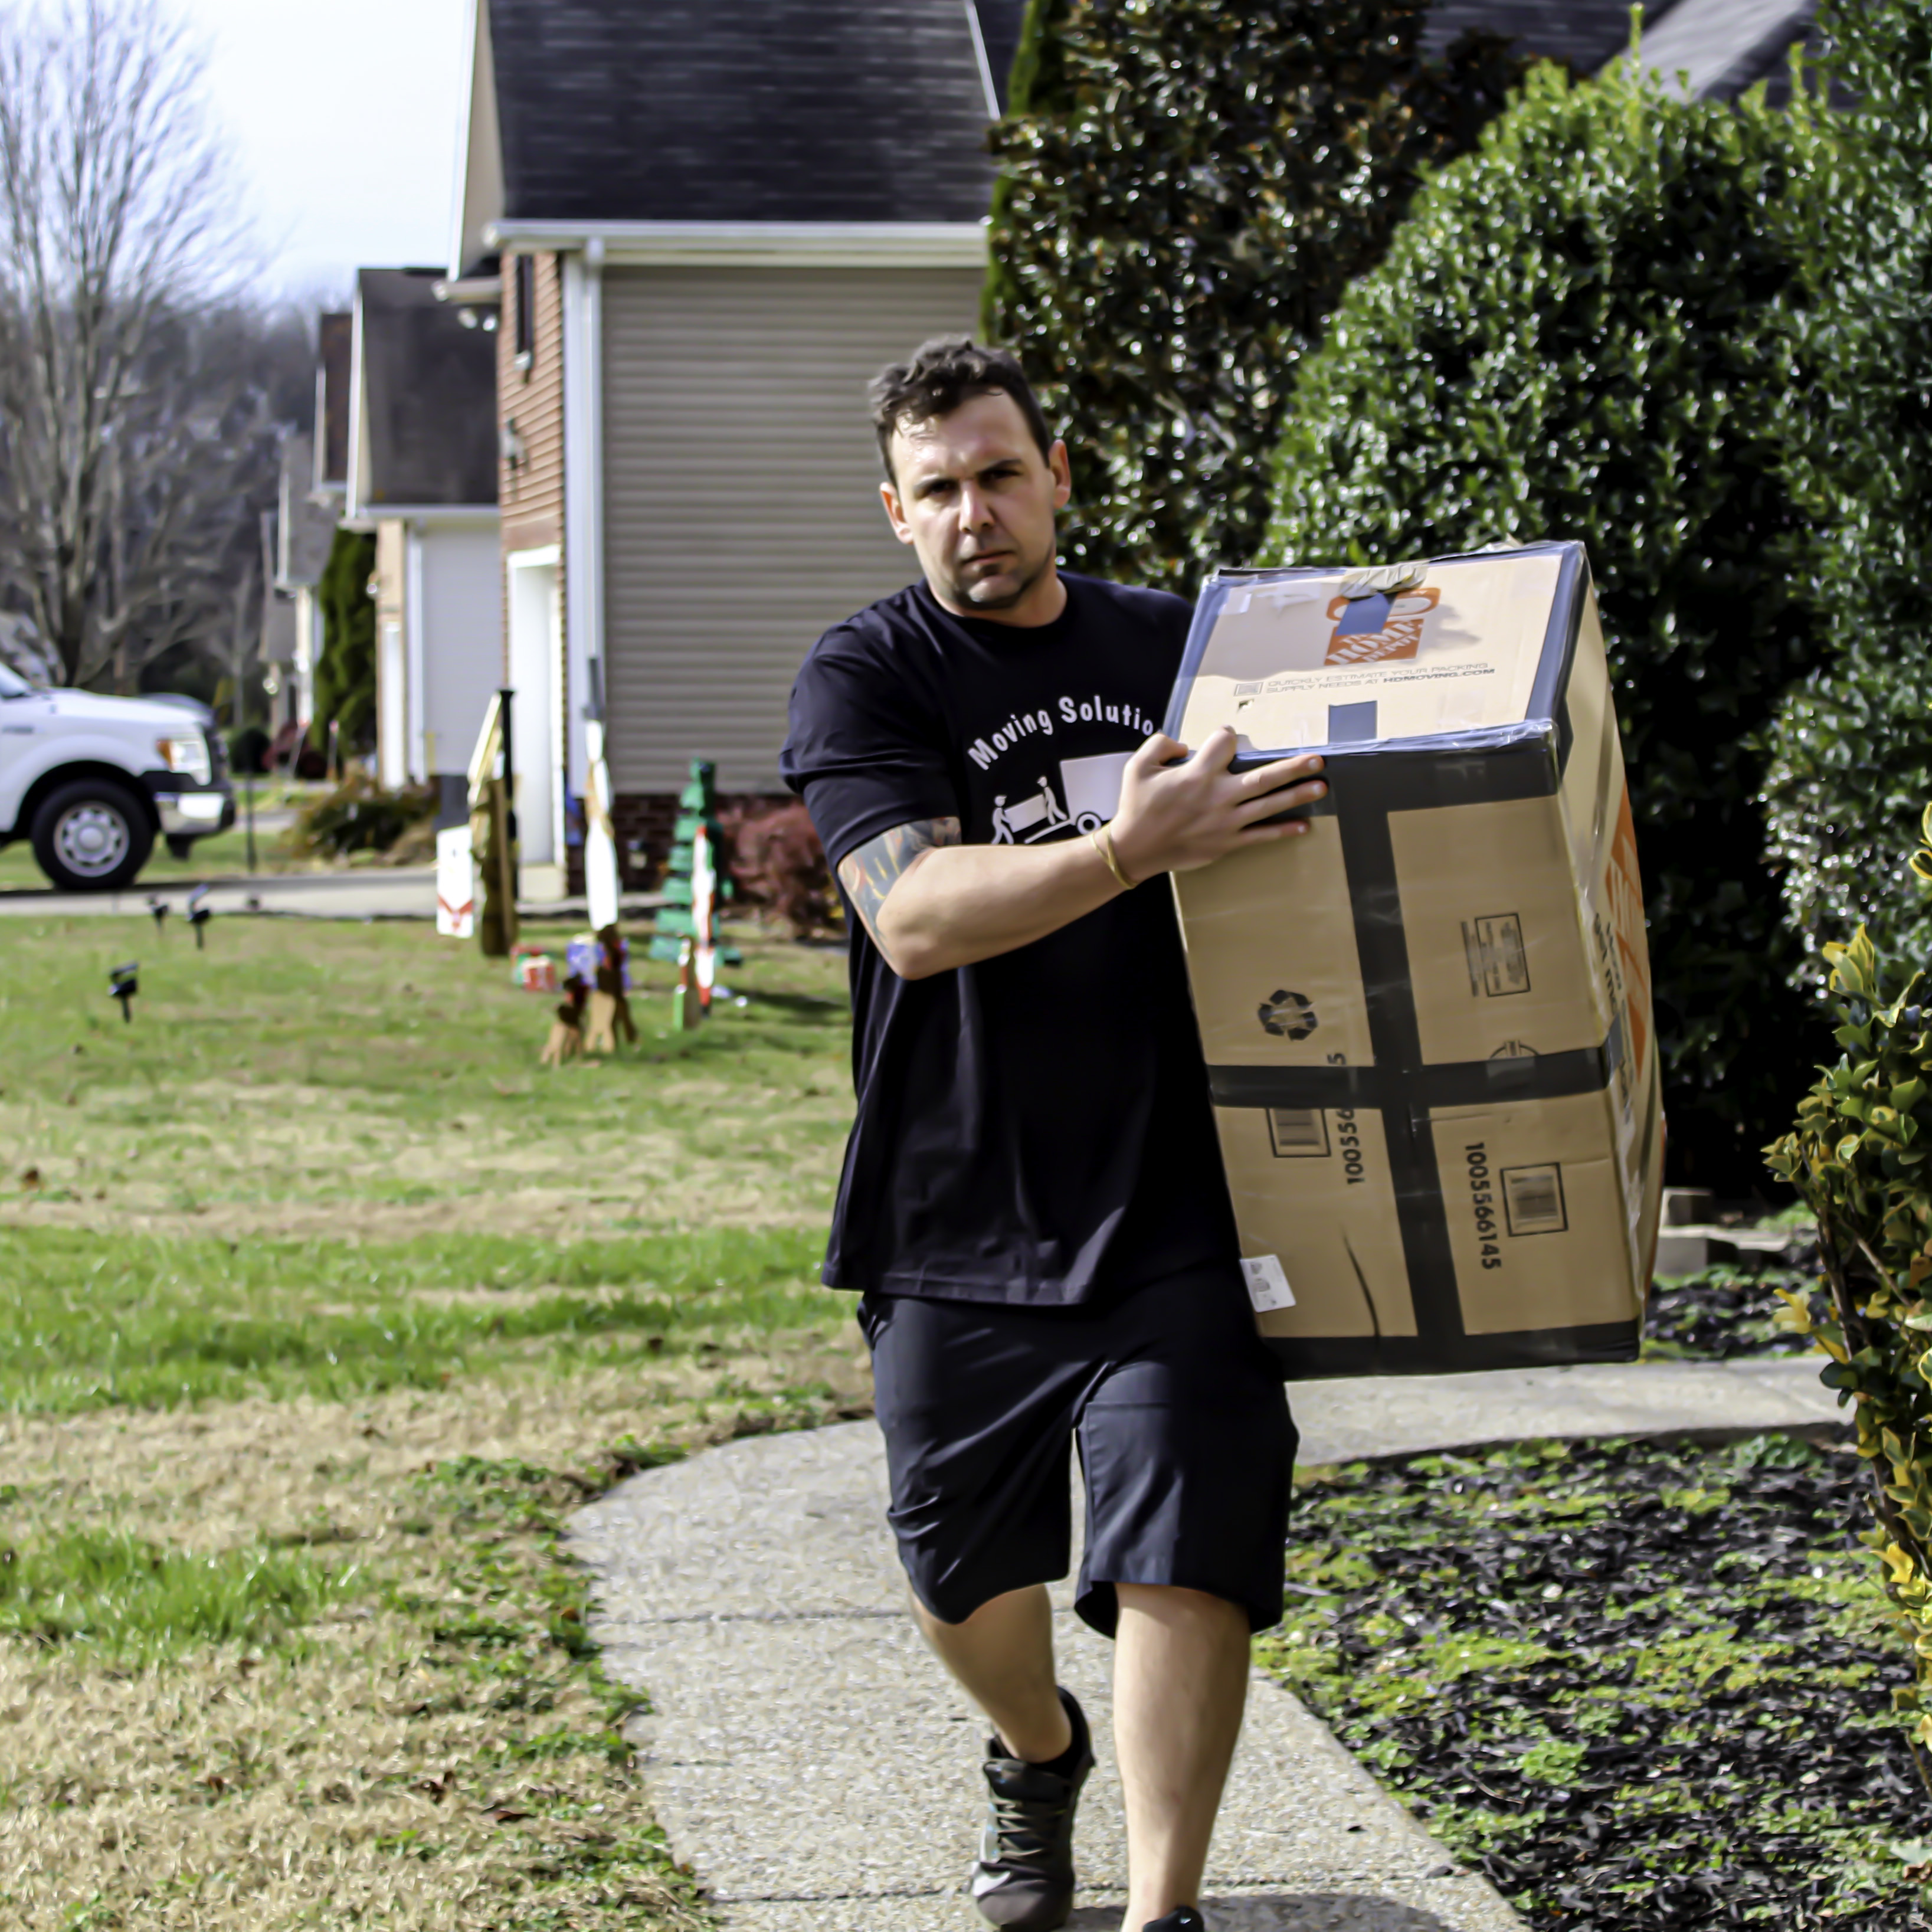 Professional Senior Moving Assistance in Tullahoma, TN area